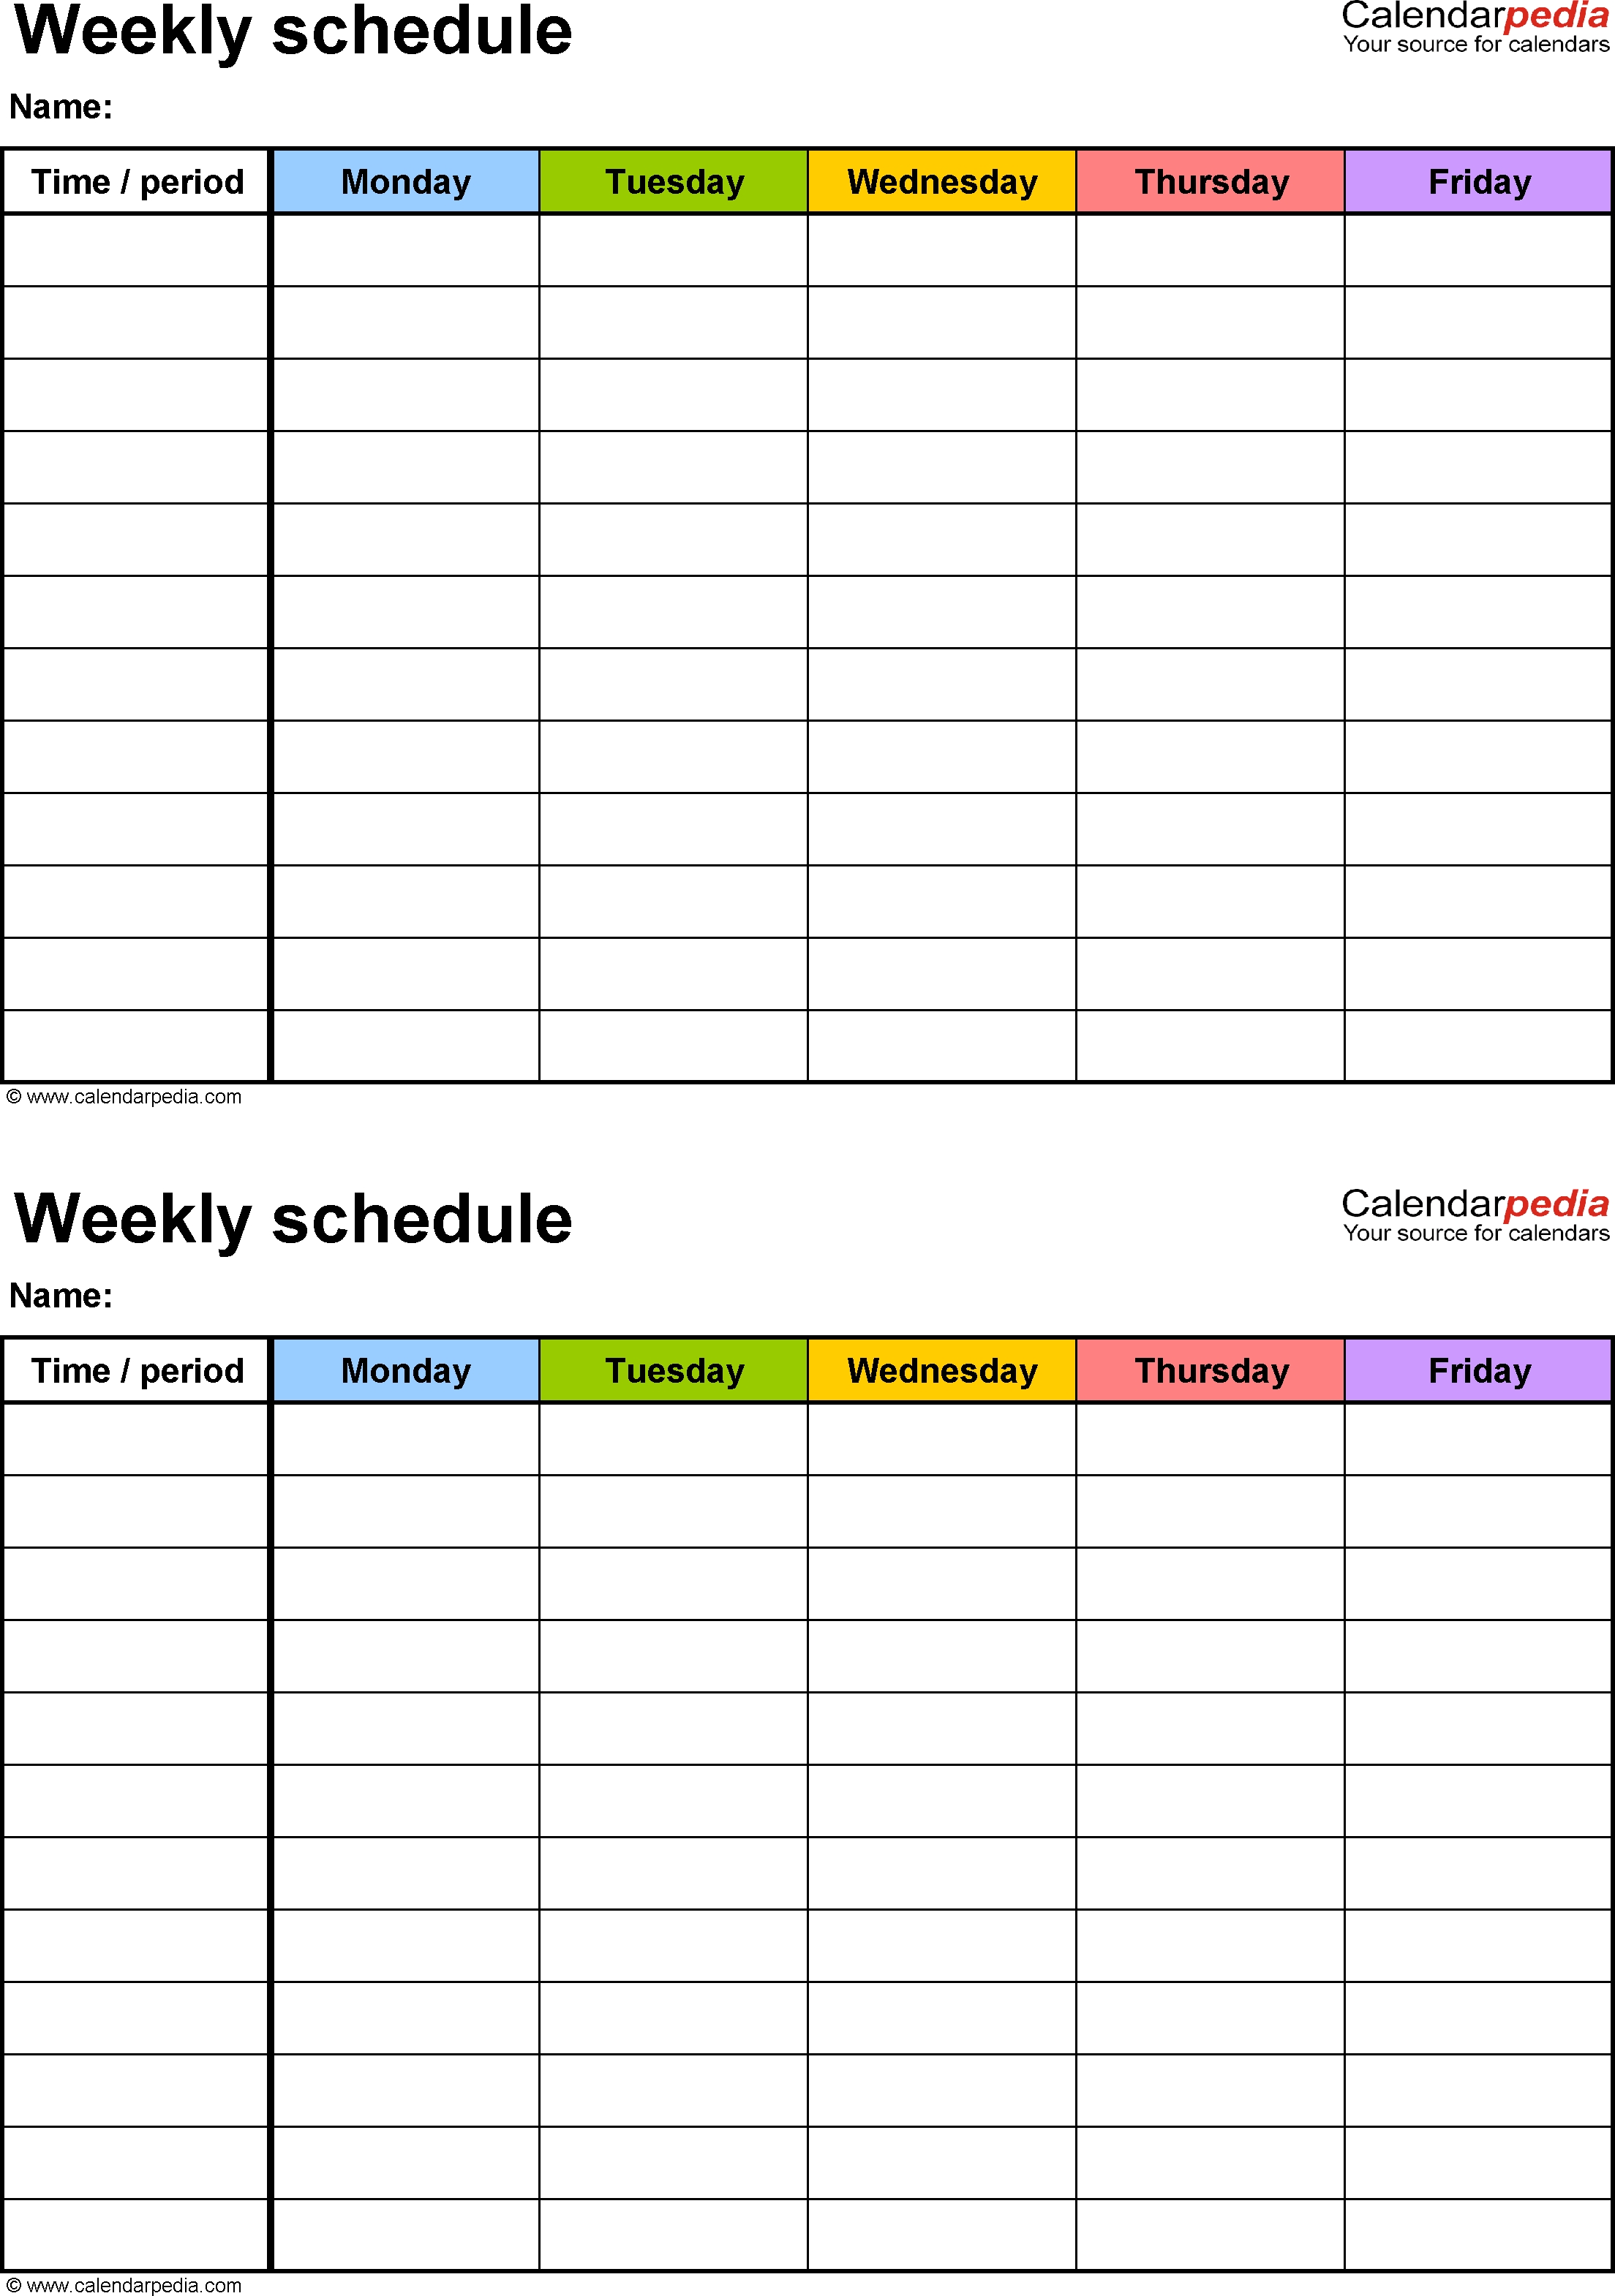 Free Weekly Schedule Templates For Excel - 18 Templates-One Page 6 Month Plan Template